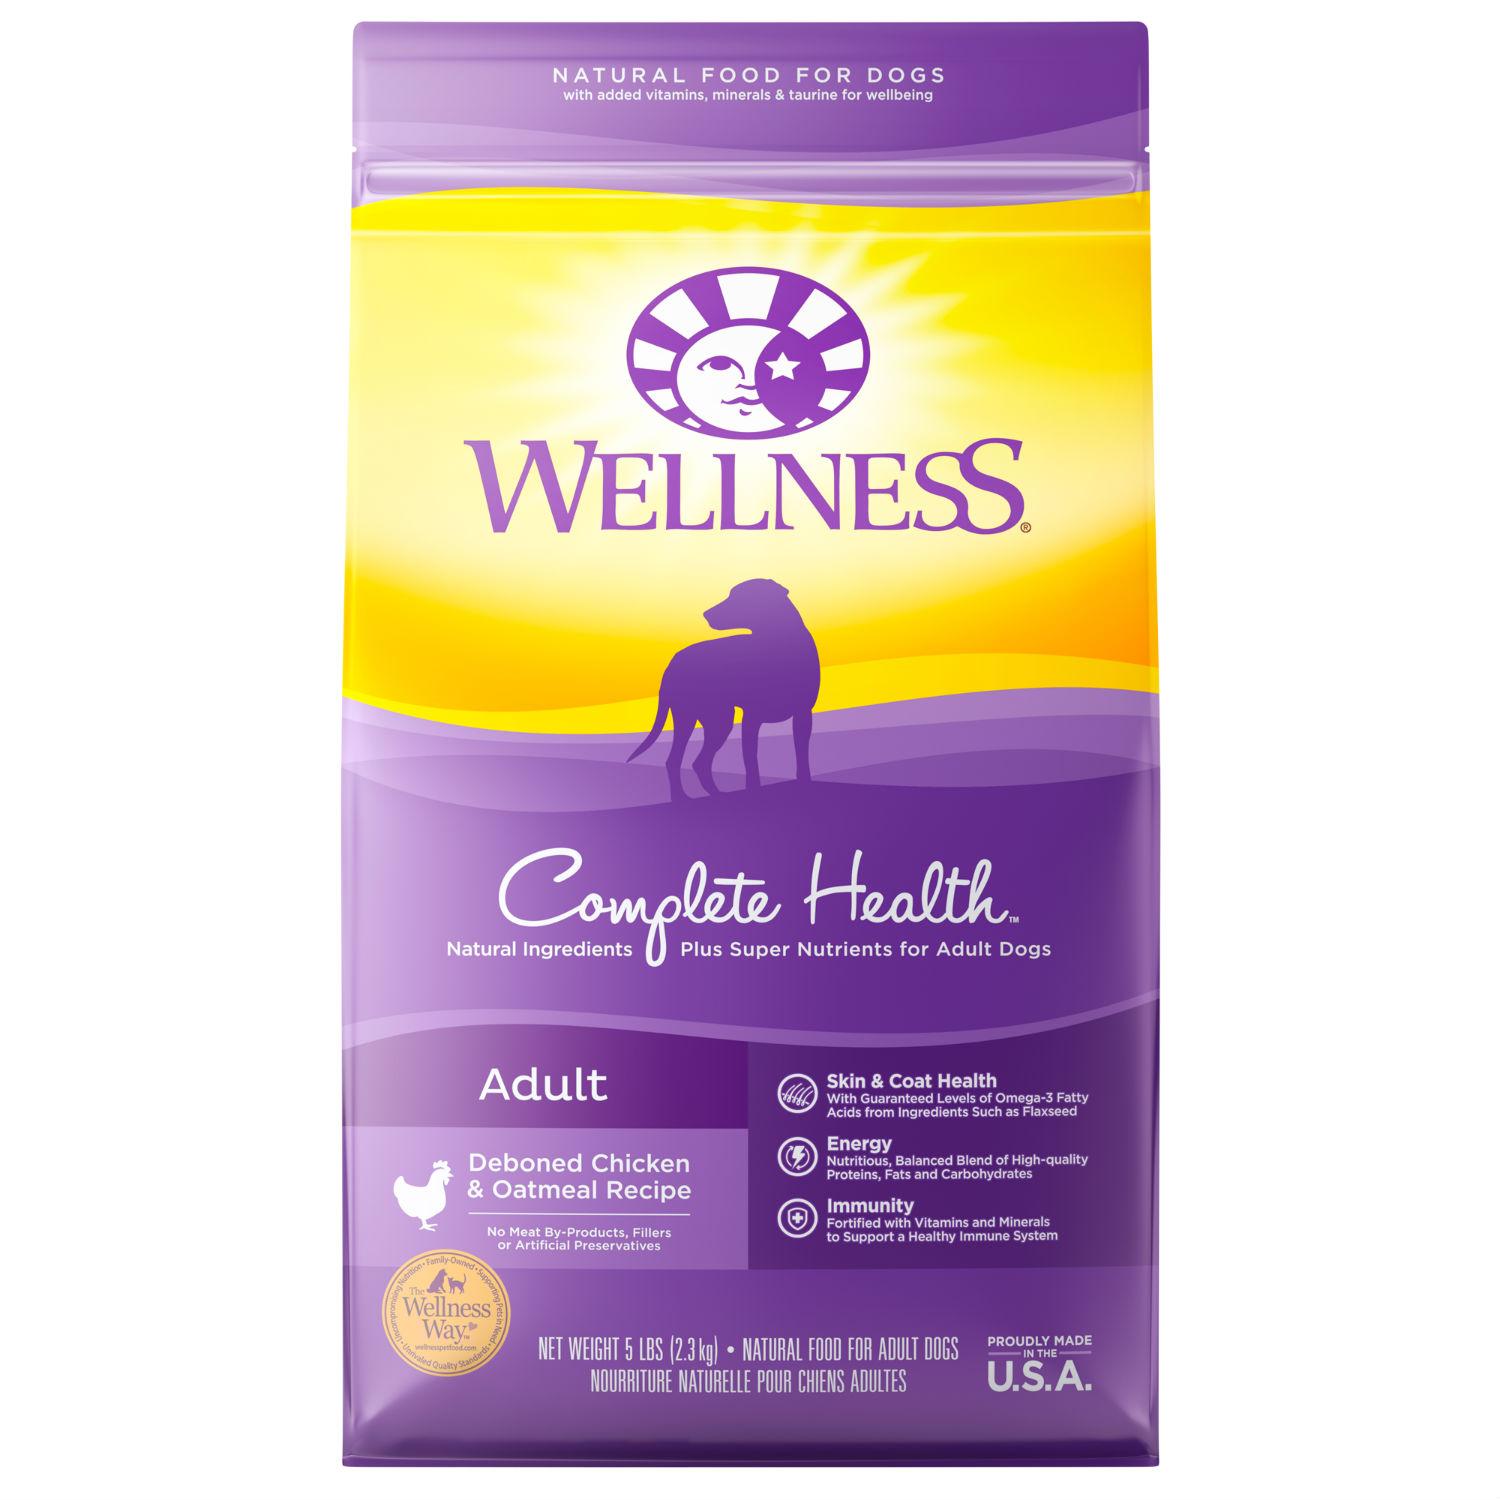 Wellness Complete Health Dog Food - Chicken and Oatmeal